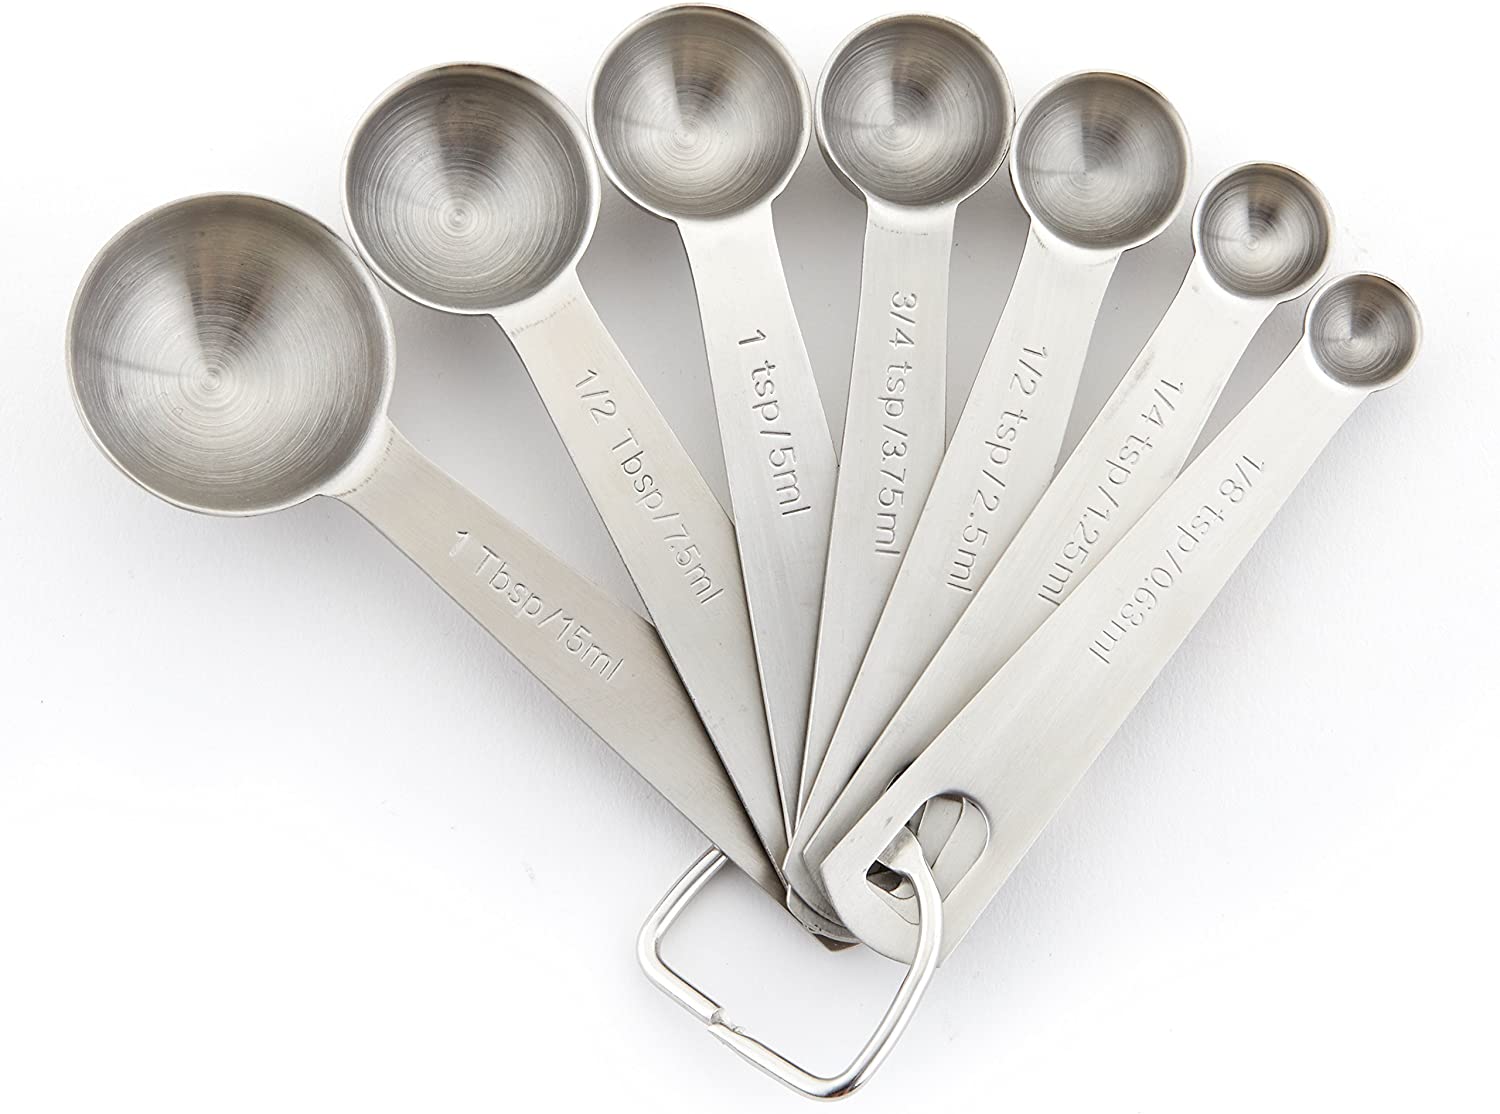 Spring Chef Oval Stainless Steel Measuring Spoons, Set of 7 & 5 Quart  Mixing Bowl With Pour Spout, White - 2 Product Bundle